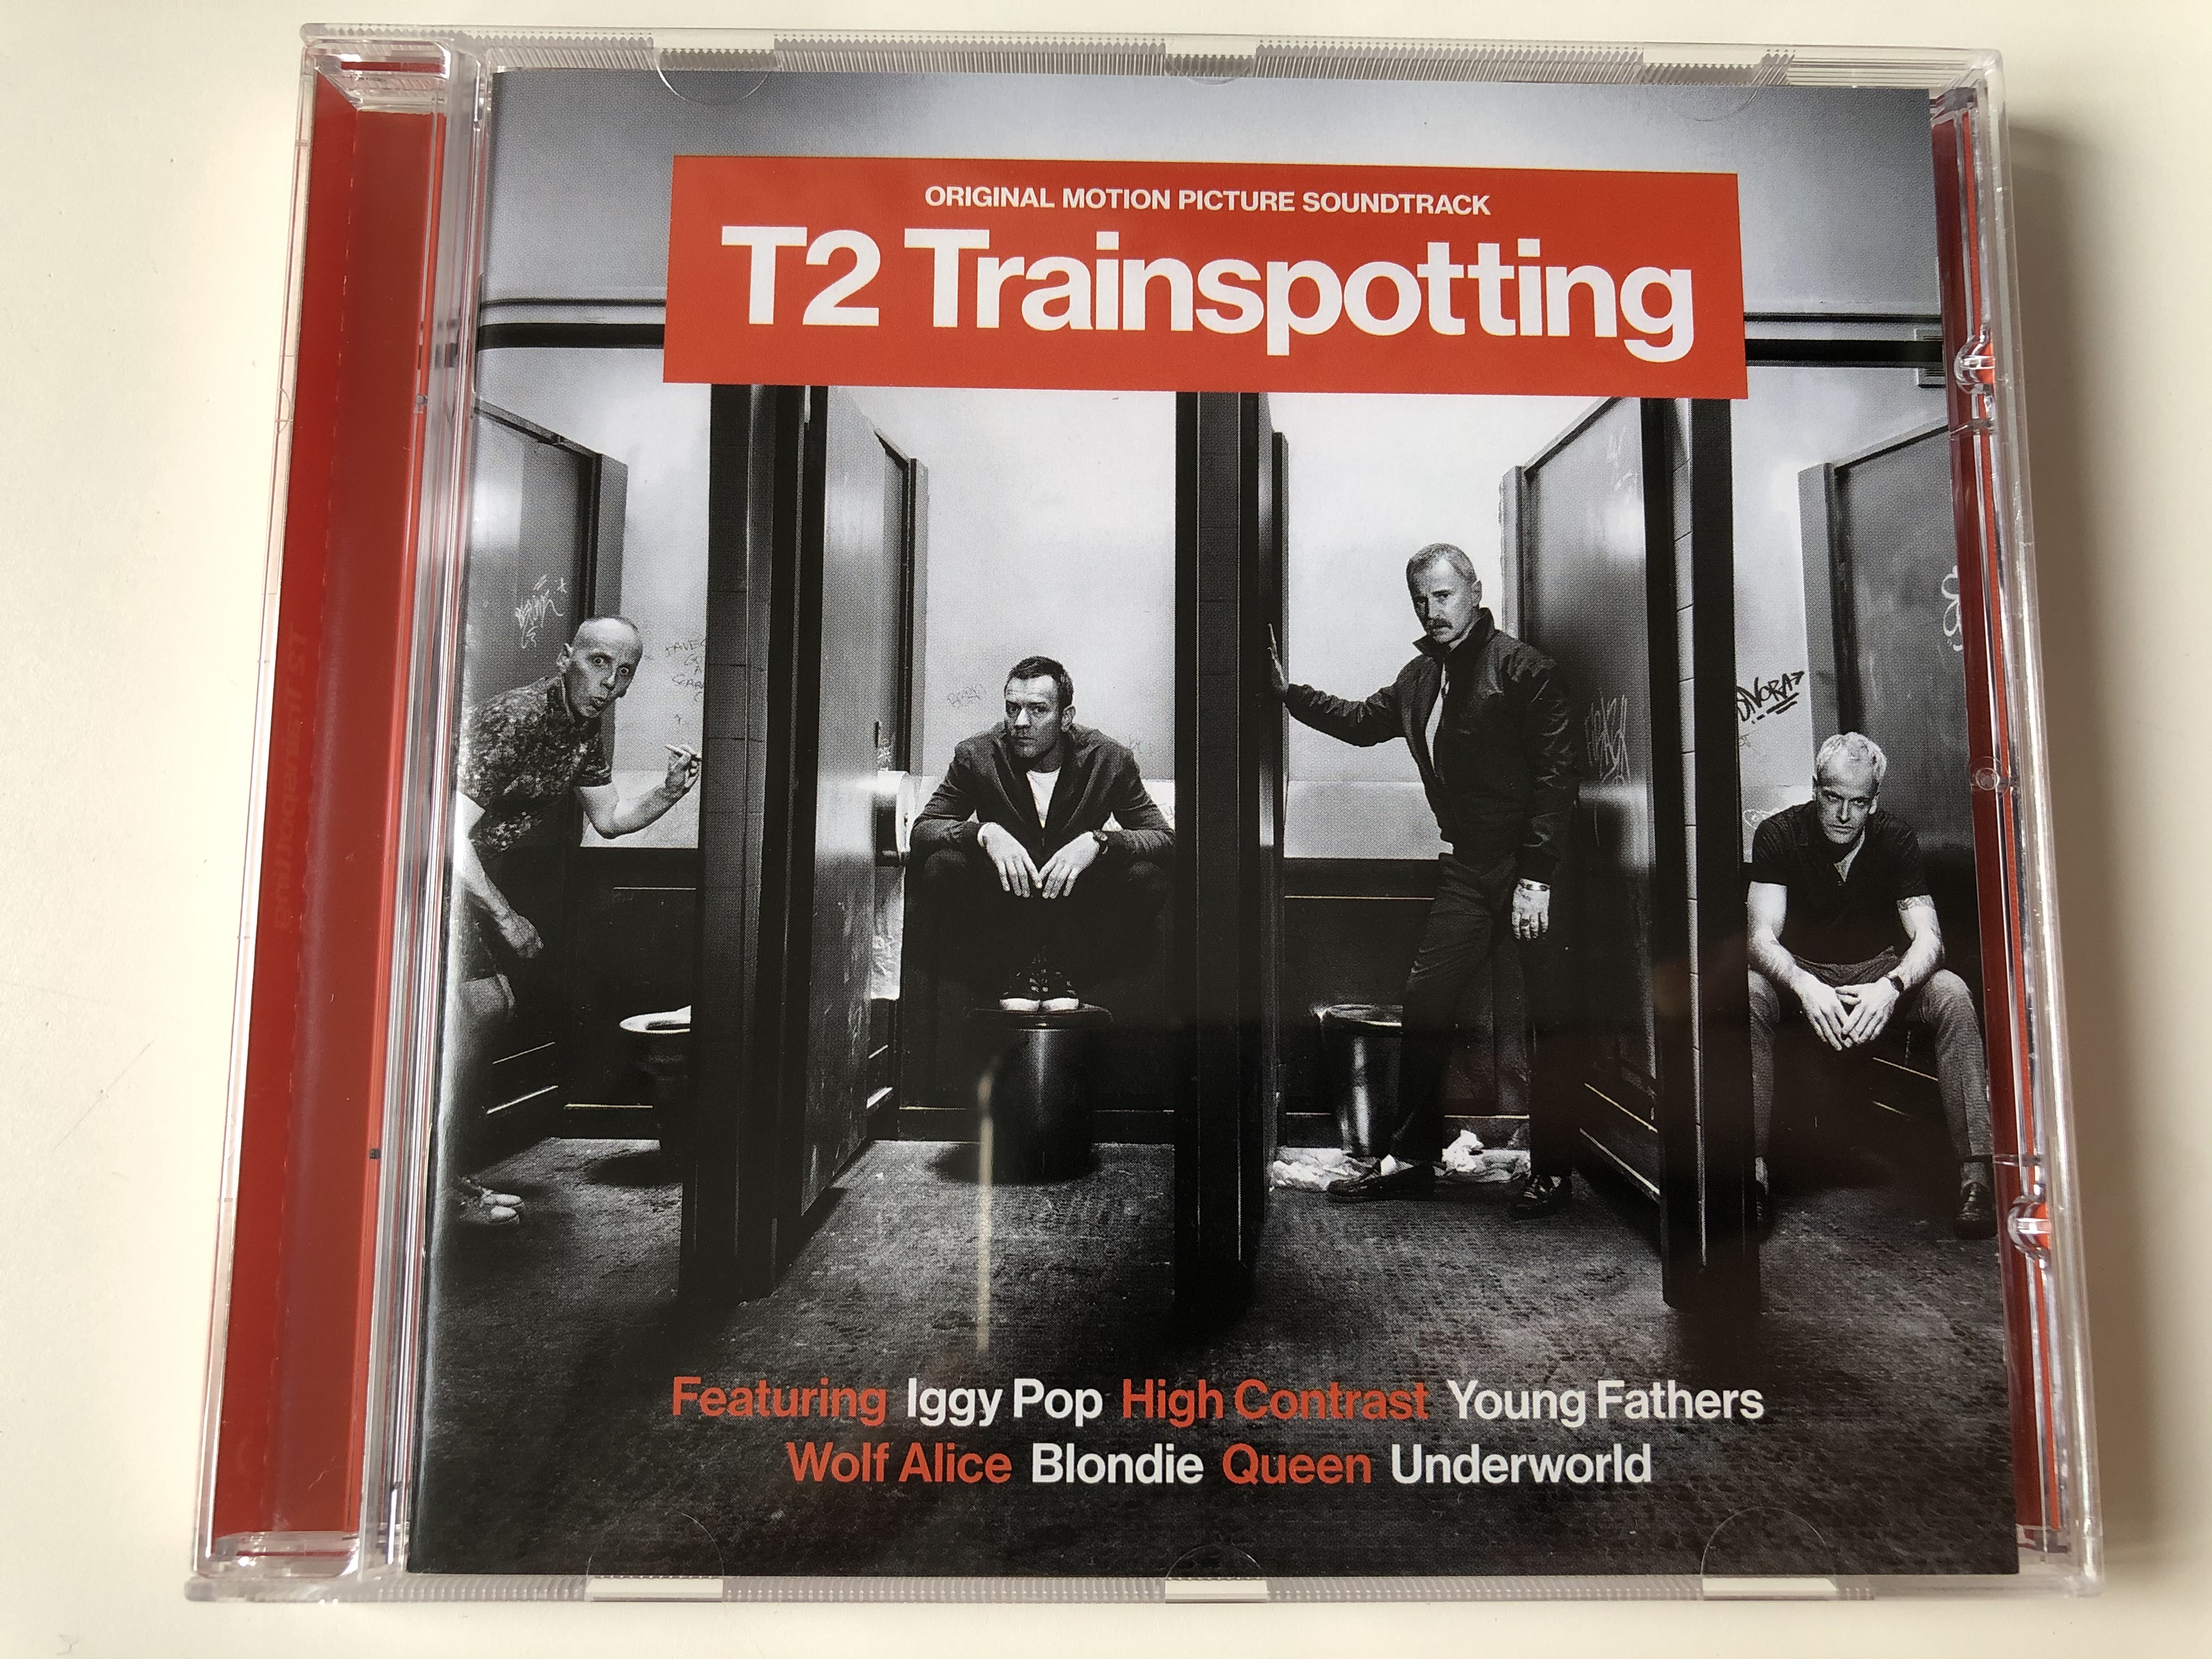 t2-trainspotting-original-motion-picture-soundtrack-featuring-iggy-pop-high-contrast-young-fathers-wolf-alice-blondie-queen-underworld-polydor-audio-cd-2017-5737941-1-.jpg